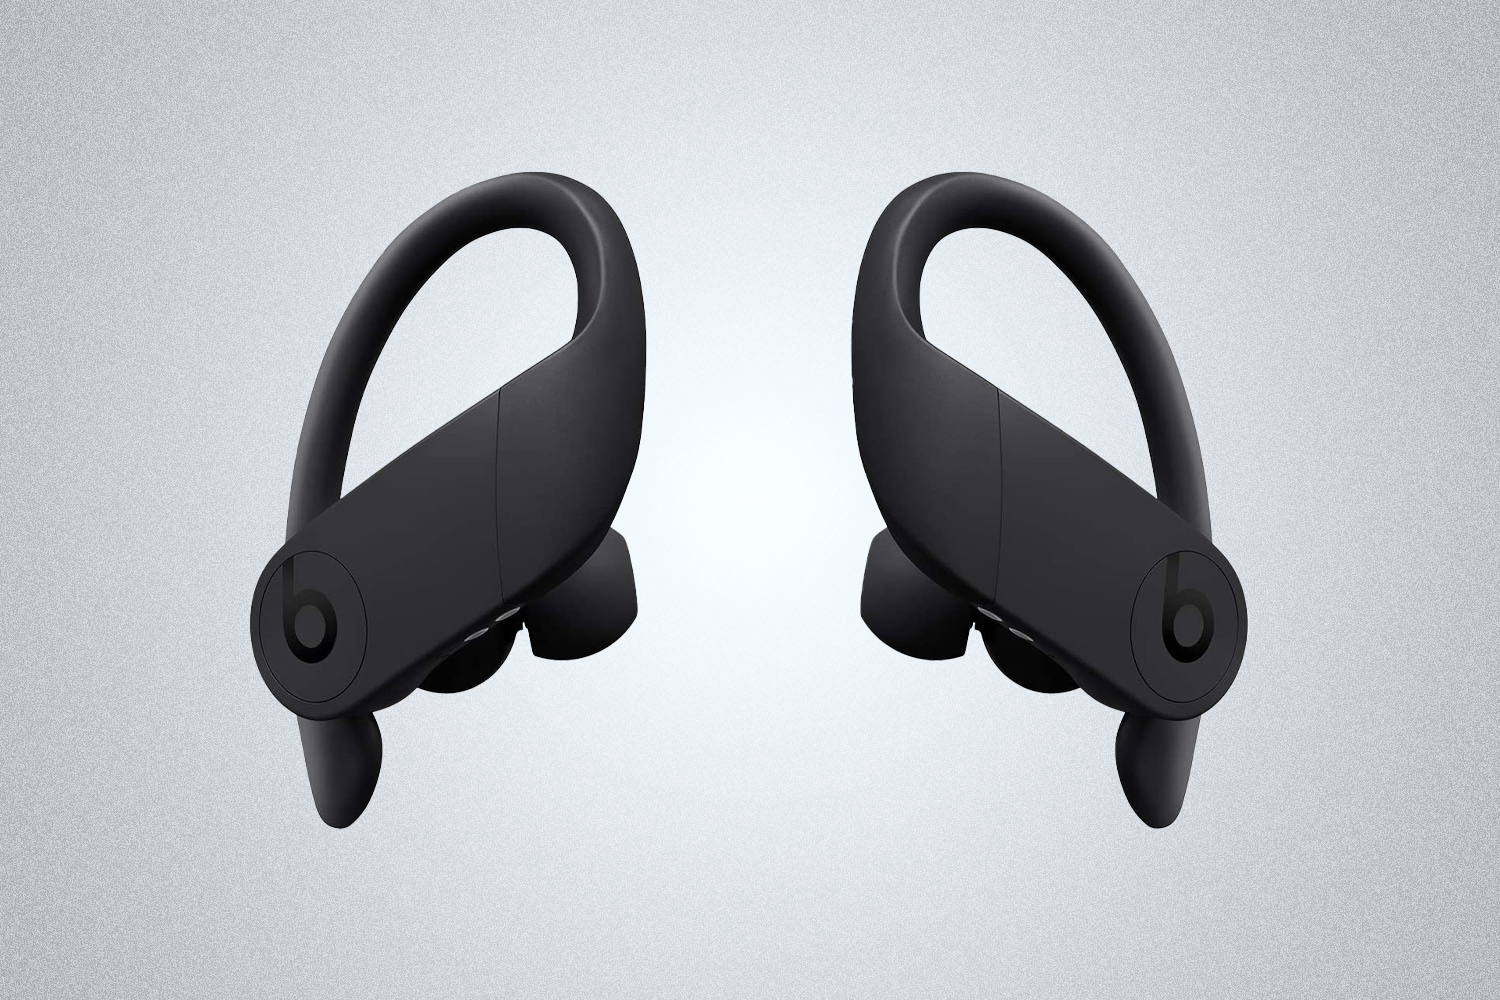 The Powerbeats Pro Wireless Earbuds in black are the best earbuds for working out because of the small size and waterproof design that resists sweat